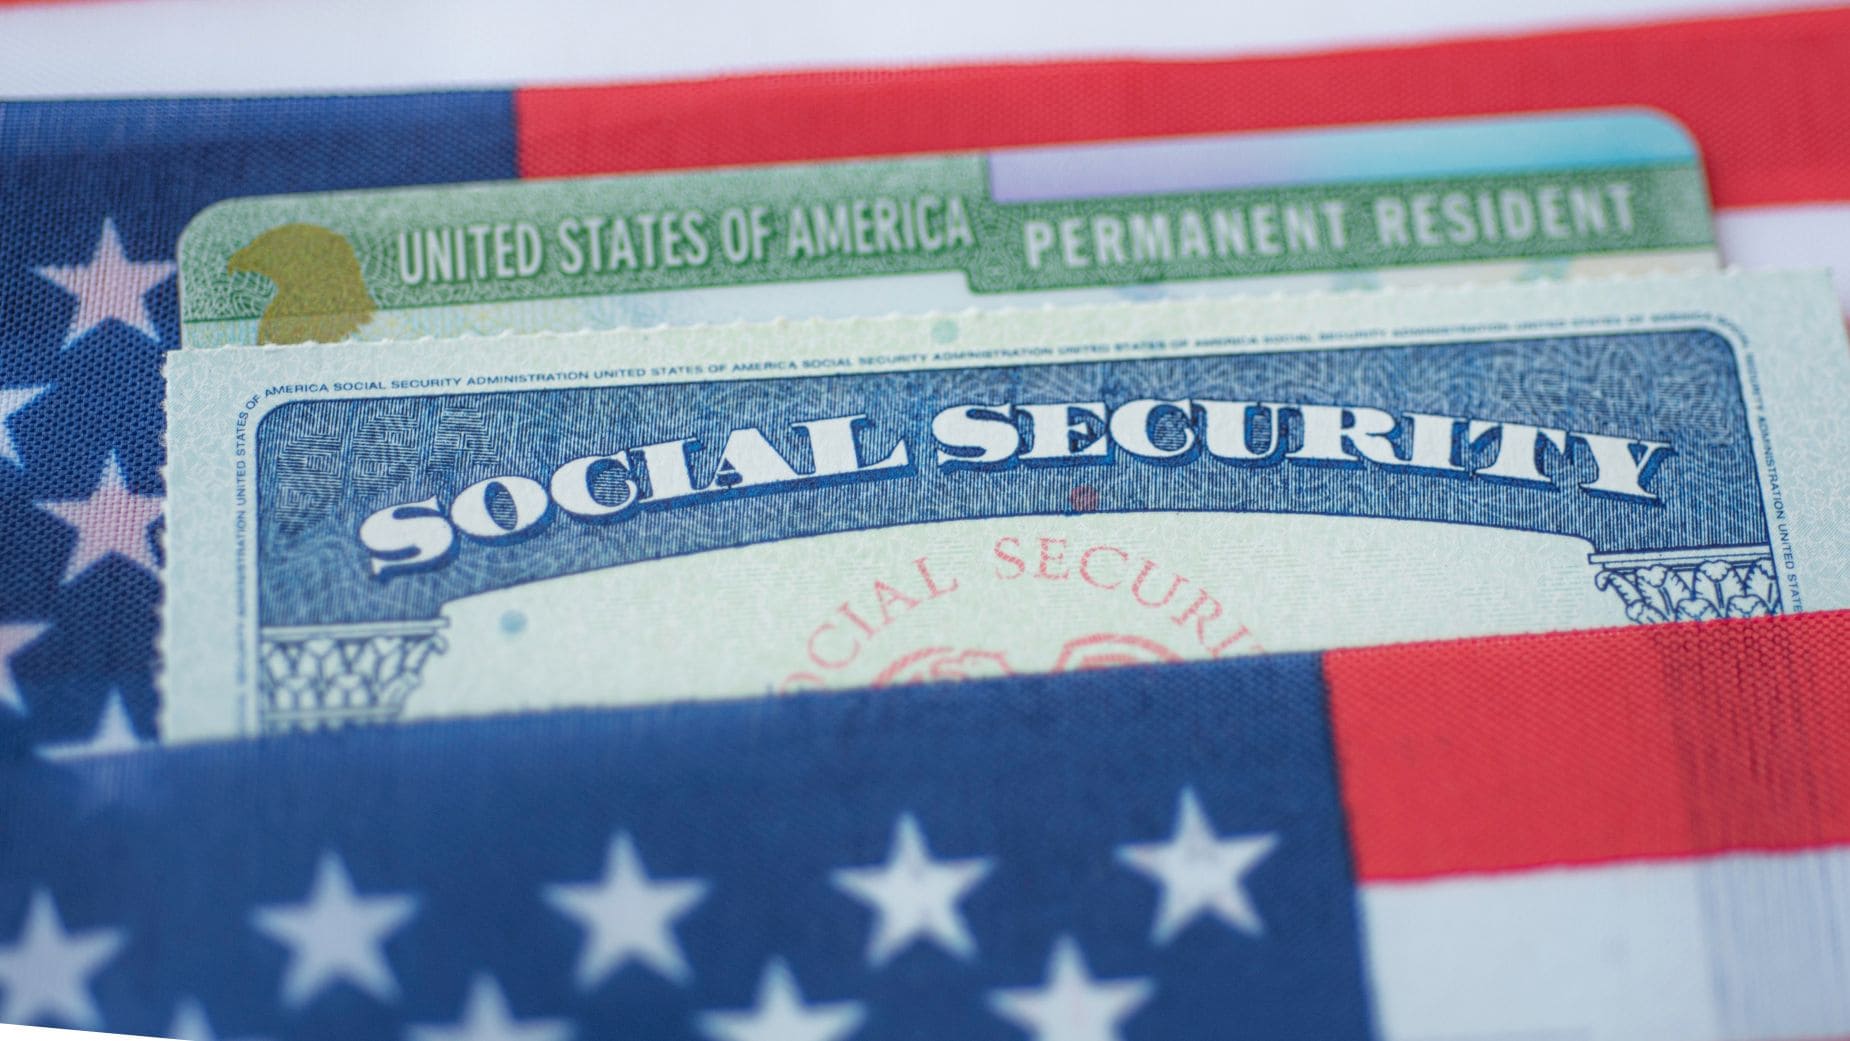 You cannot get the new Social Security check if you are not part of this group